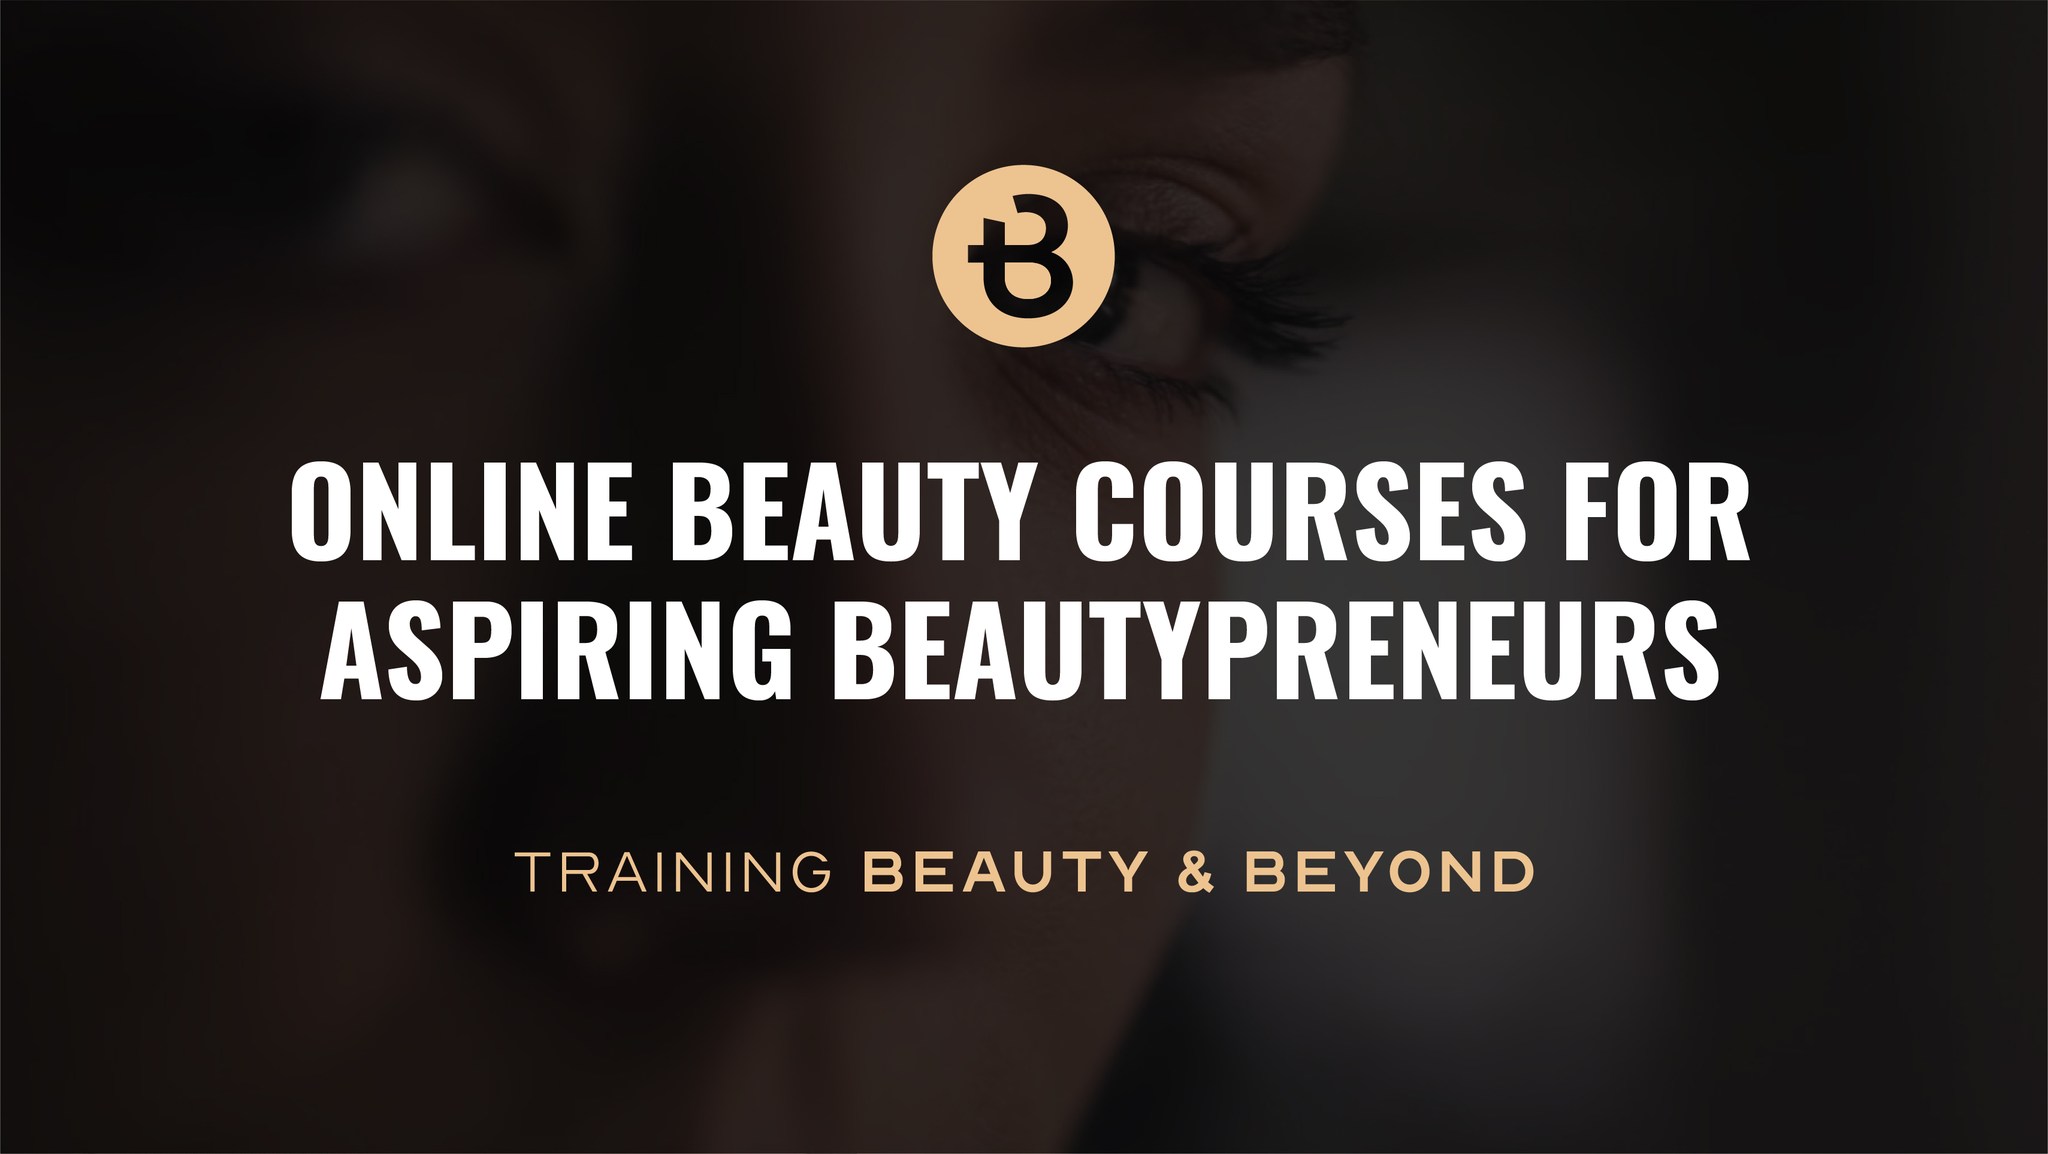 Training Beauty & Beyond picture